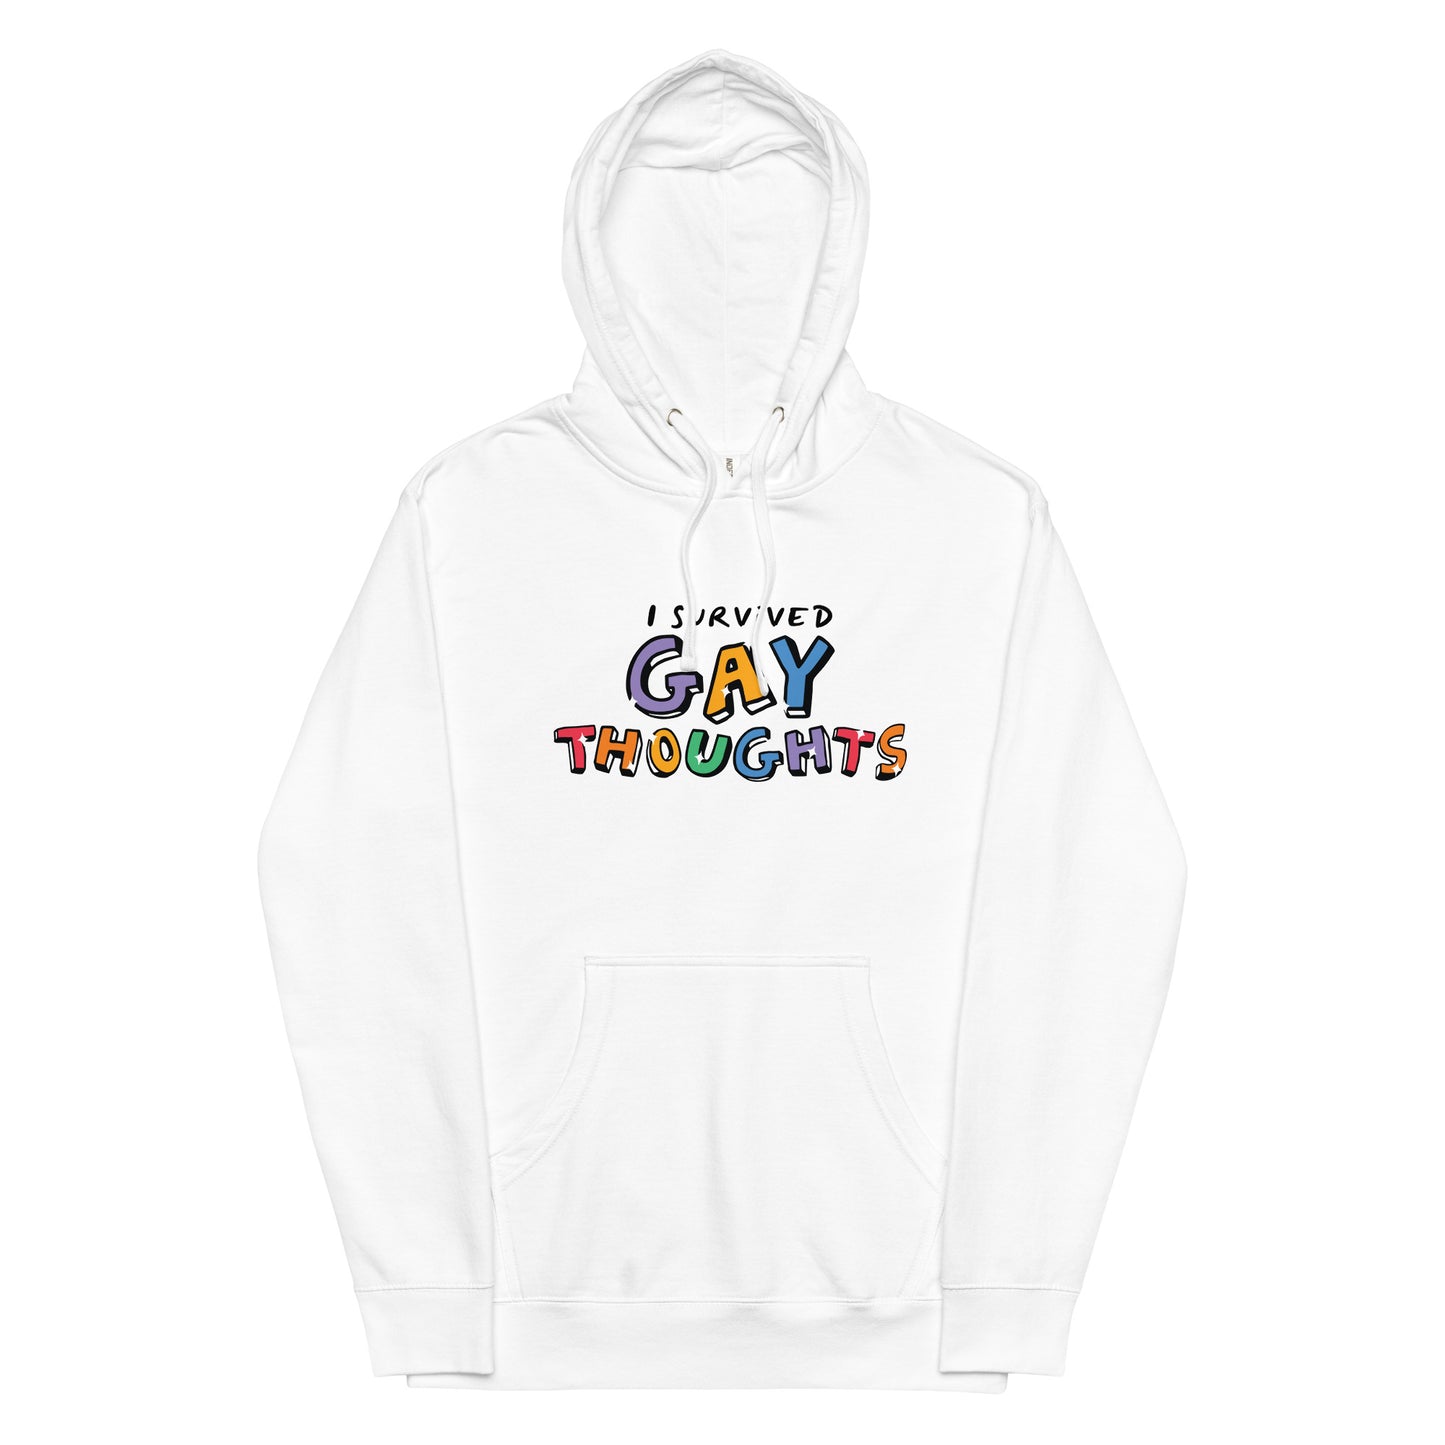 I Survived Gay Thoughts Unisex hoodie